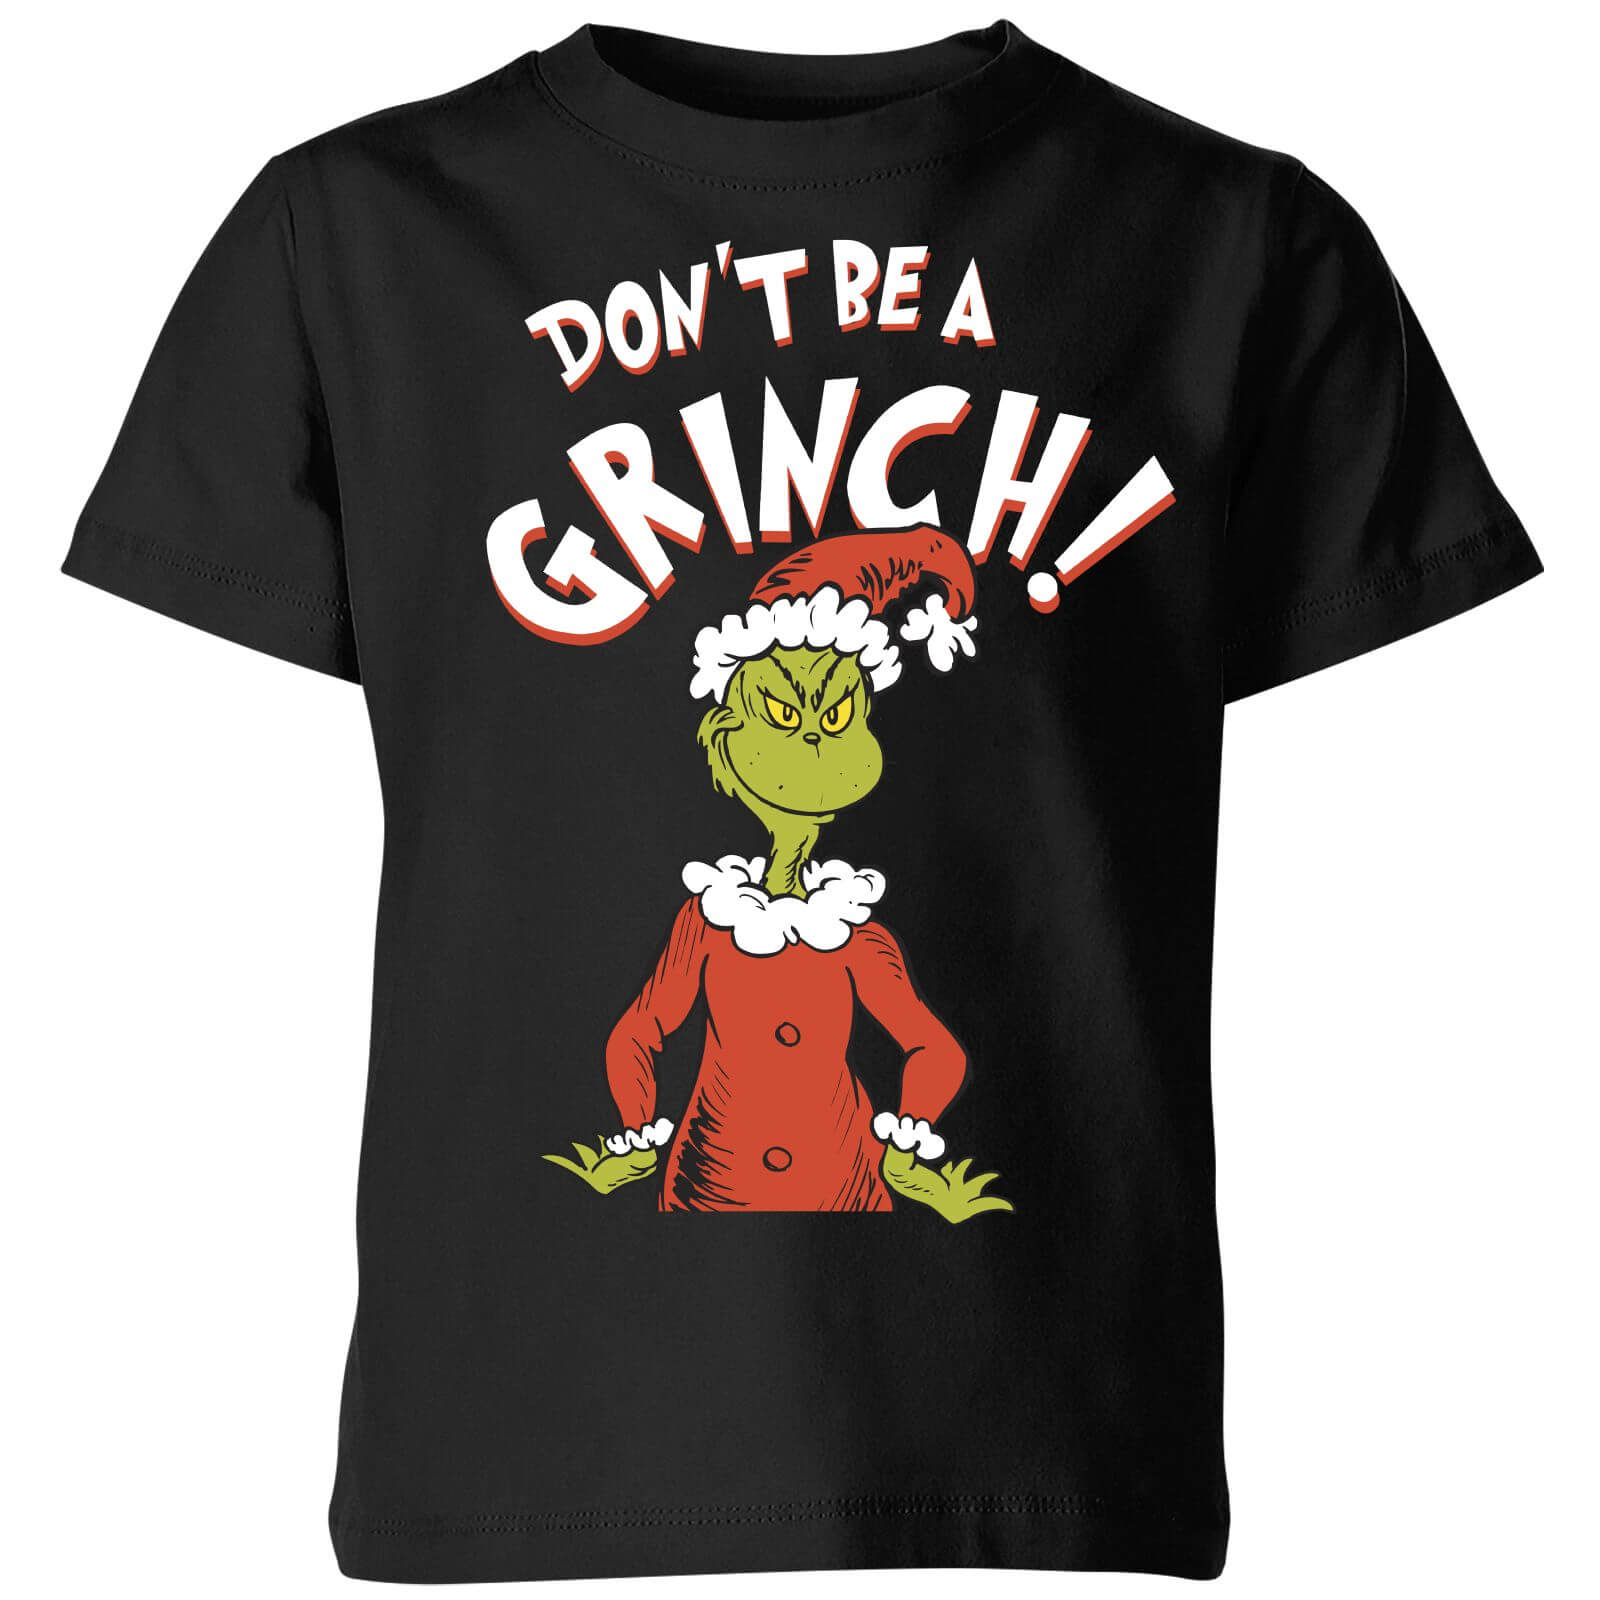 Dr. Seuss The Grinch Dont Be A Grinch Kids Christmas T-Shirt - Black - 3-4 Years - Black